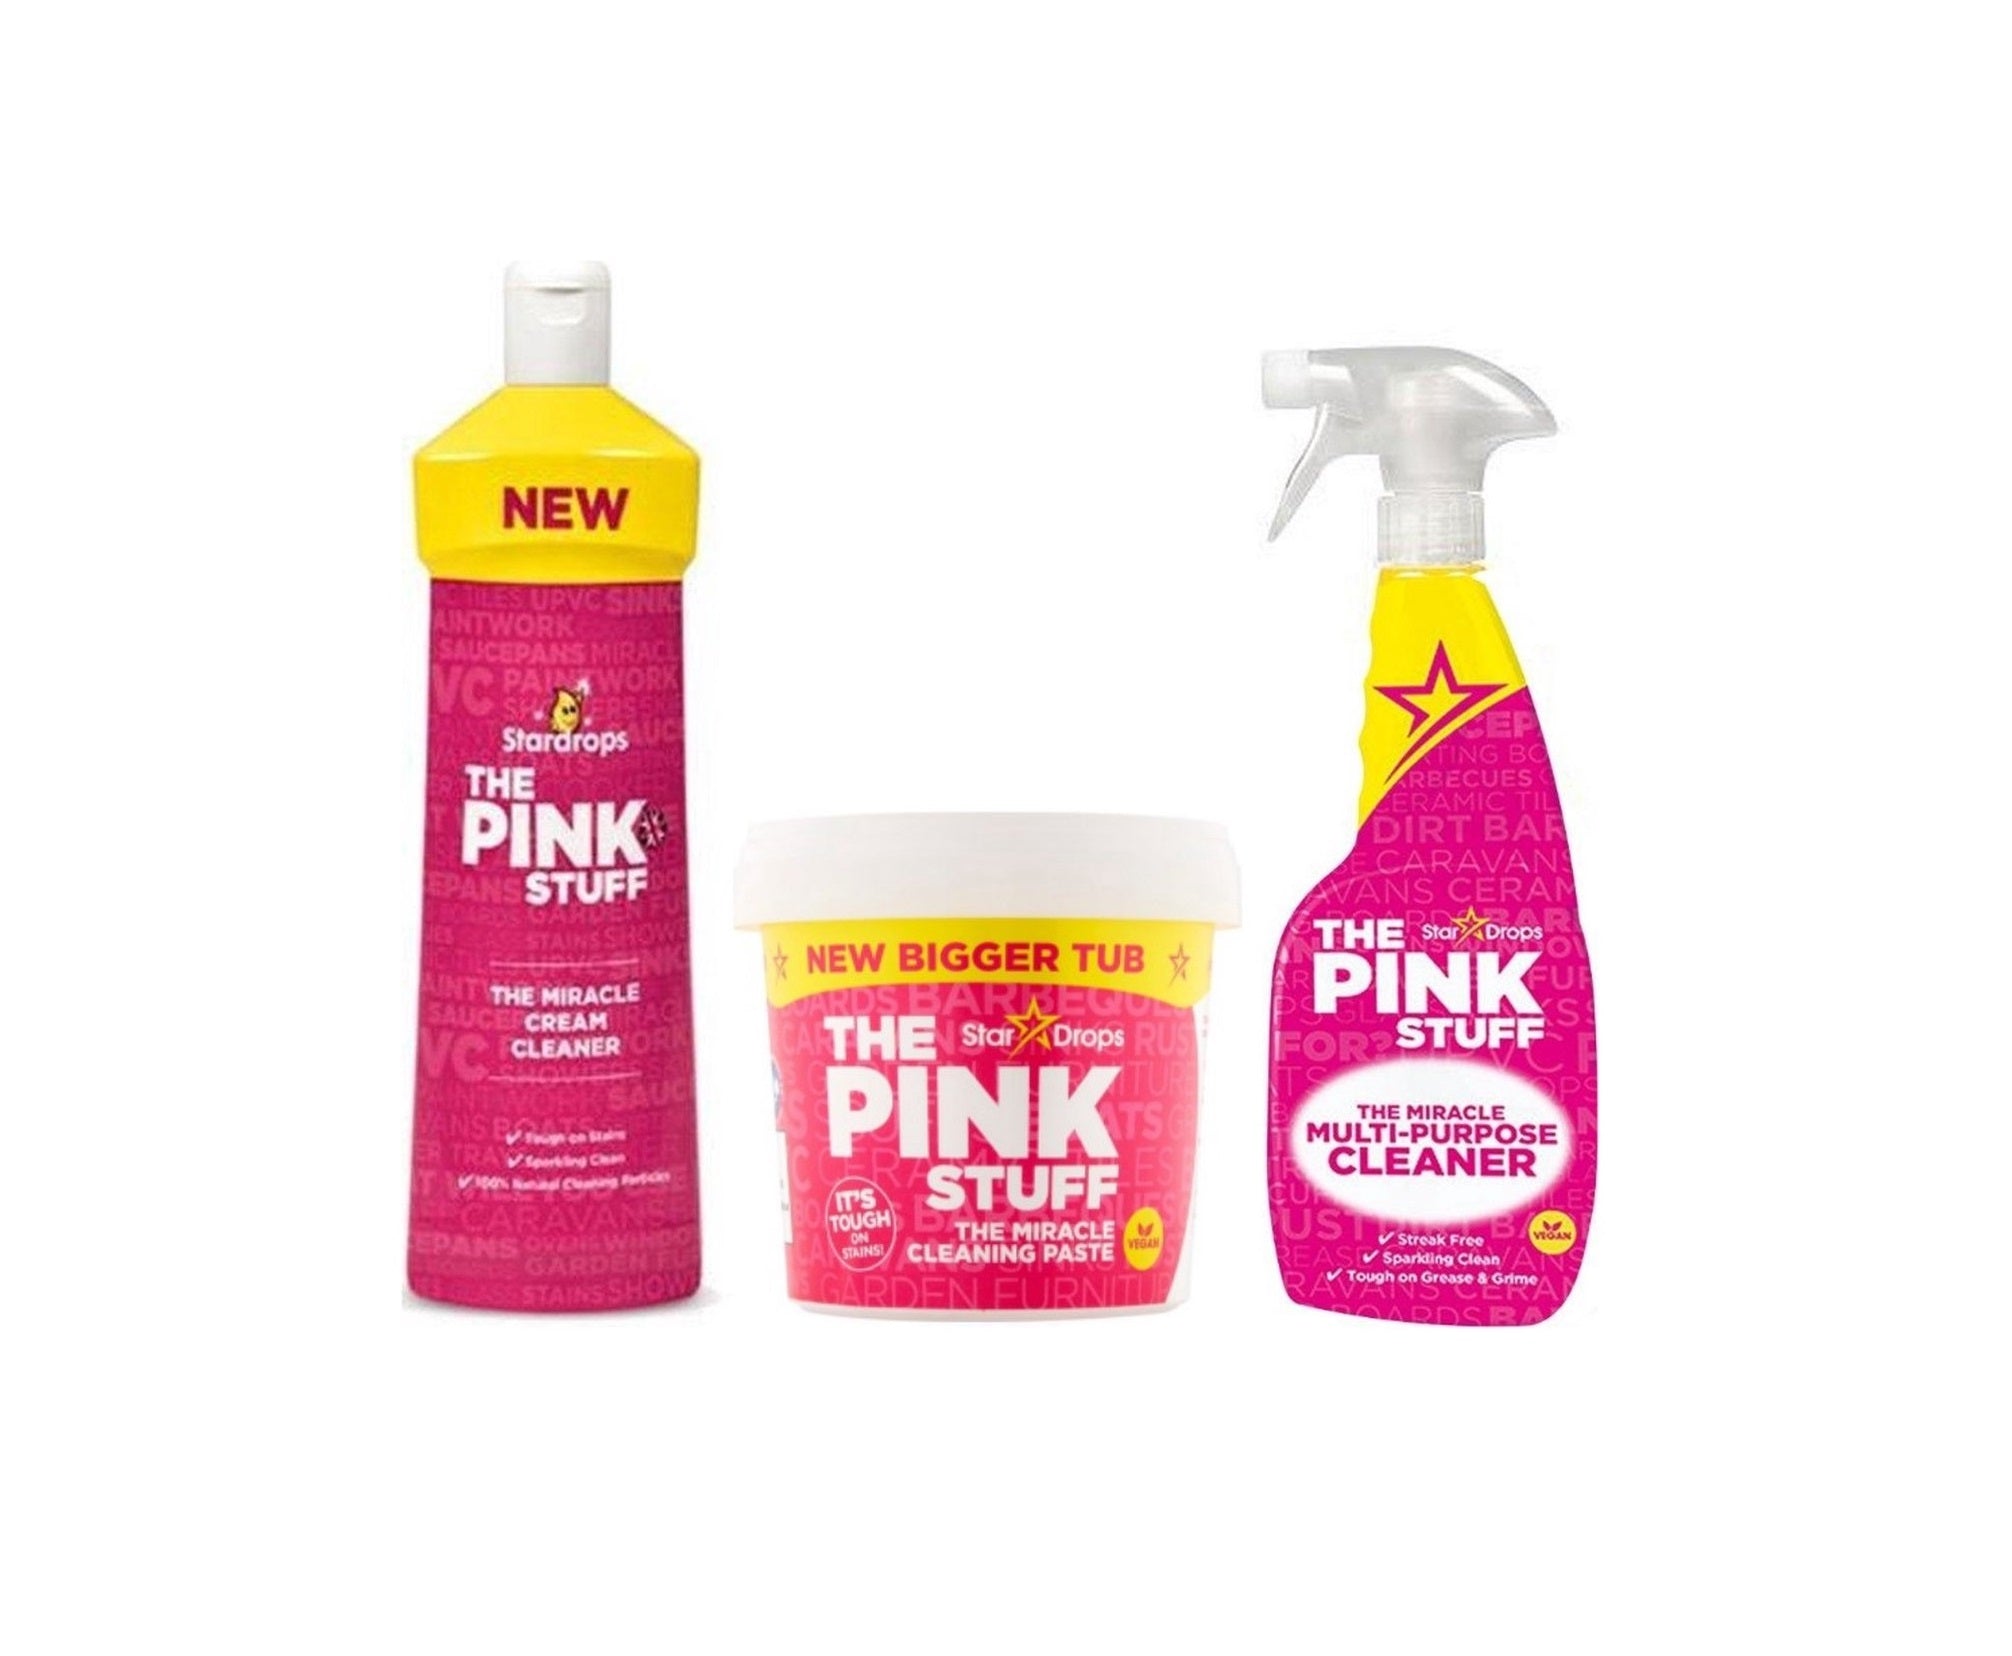 The Pink Stuff - Miracle Cleaning Paste, Multi-Purpose Spray